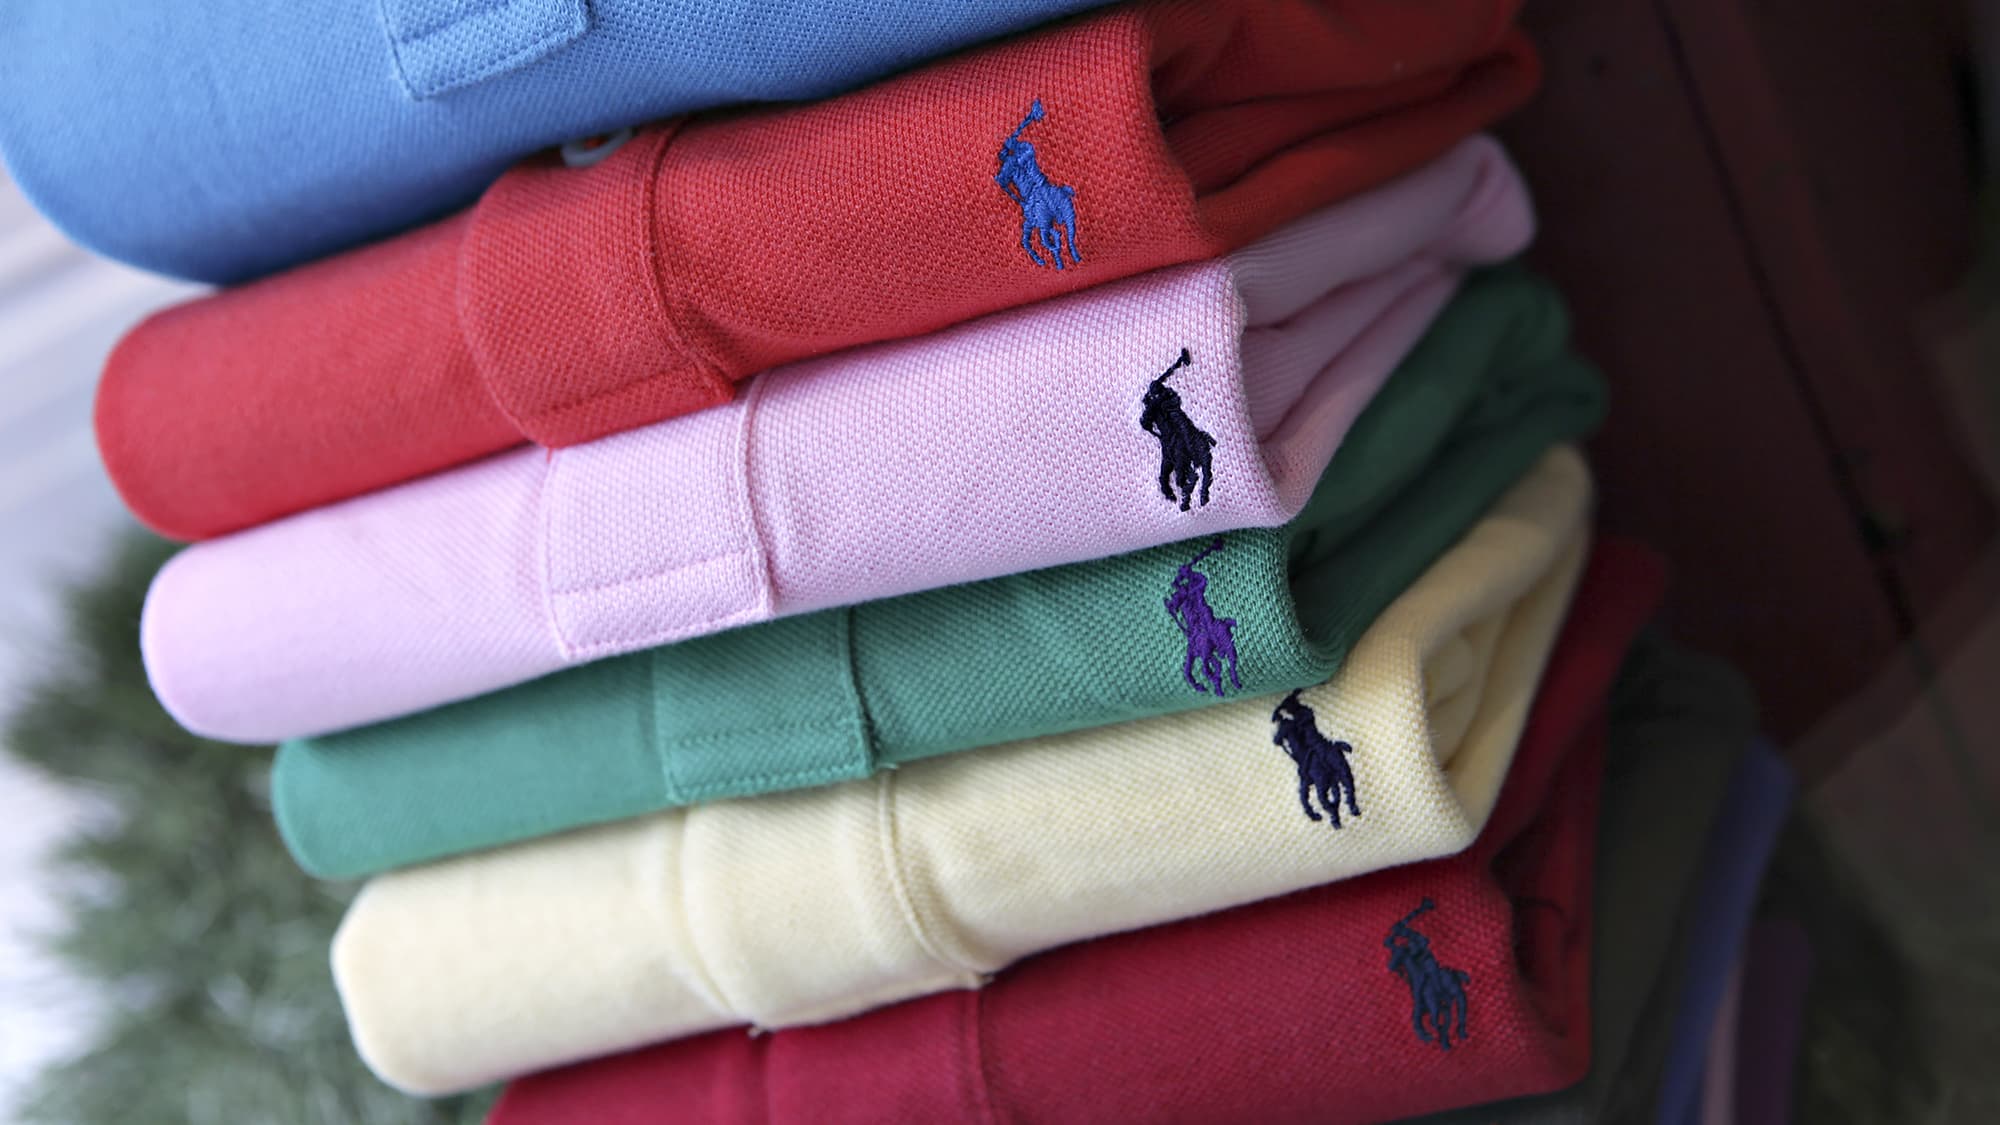 Future of Ralph Lauren, and retail, may be coloring clothes in store